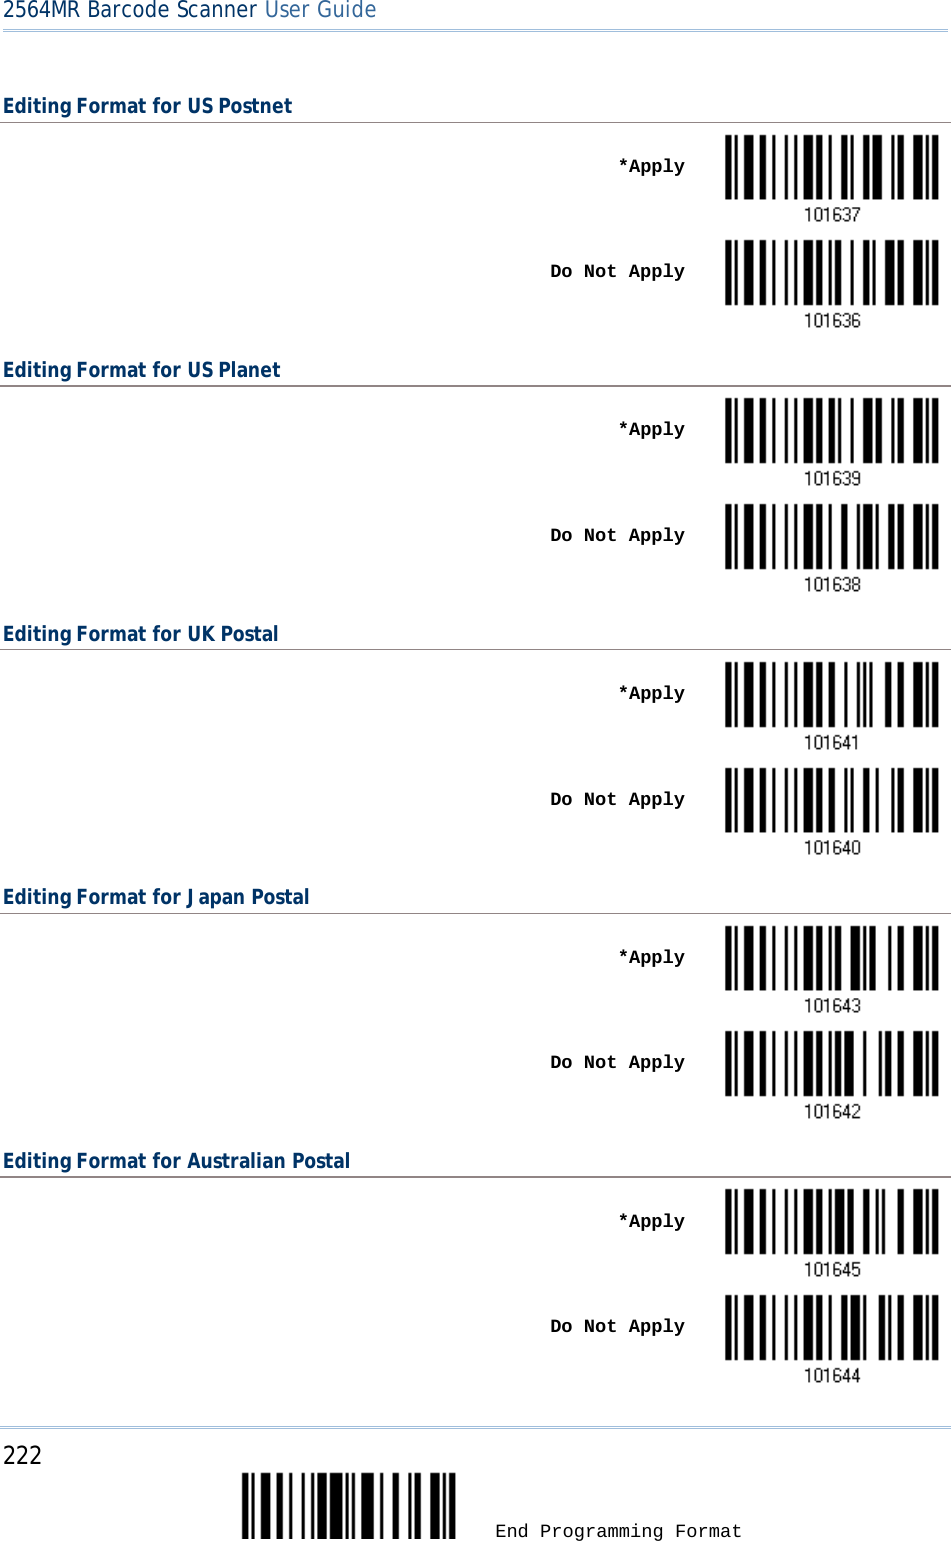 2564MR Barcode Scanner User Guide  Editing Format for US Postnet    *Apply     Do Not Apply  Editing Format for US Planet    *Apply     Do Not Apply  Editing Format for UK Postal    *Apply     Do Not Apply  Editing Format for Japan Postal    *Apply     Do Not Apply  Editing Format for Australian Postal    *Apply     Do Not Apply  222  End Programming Format 